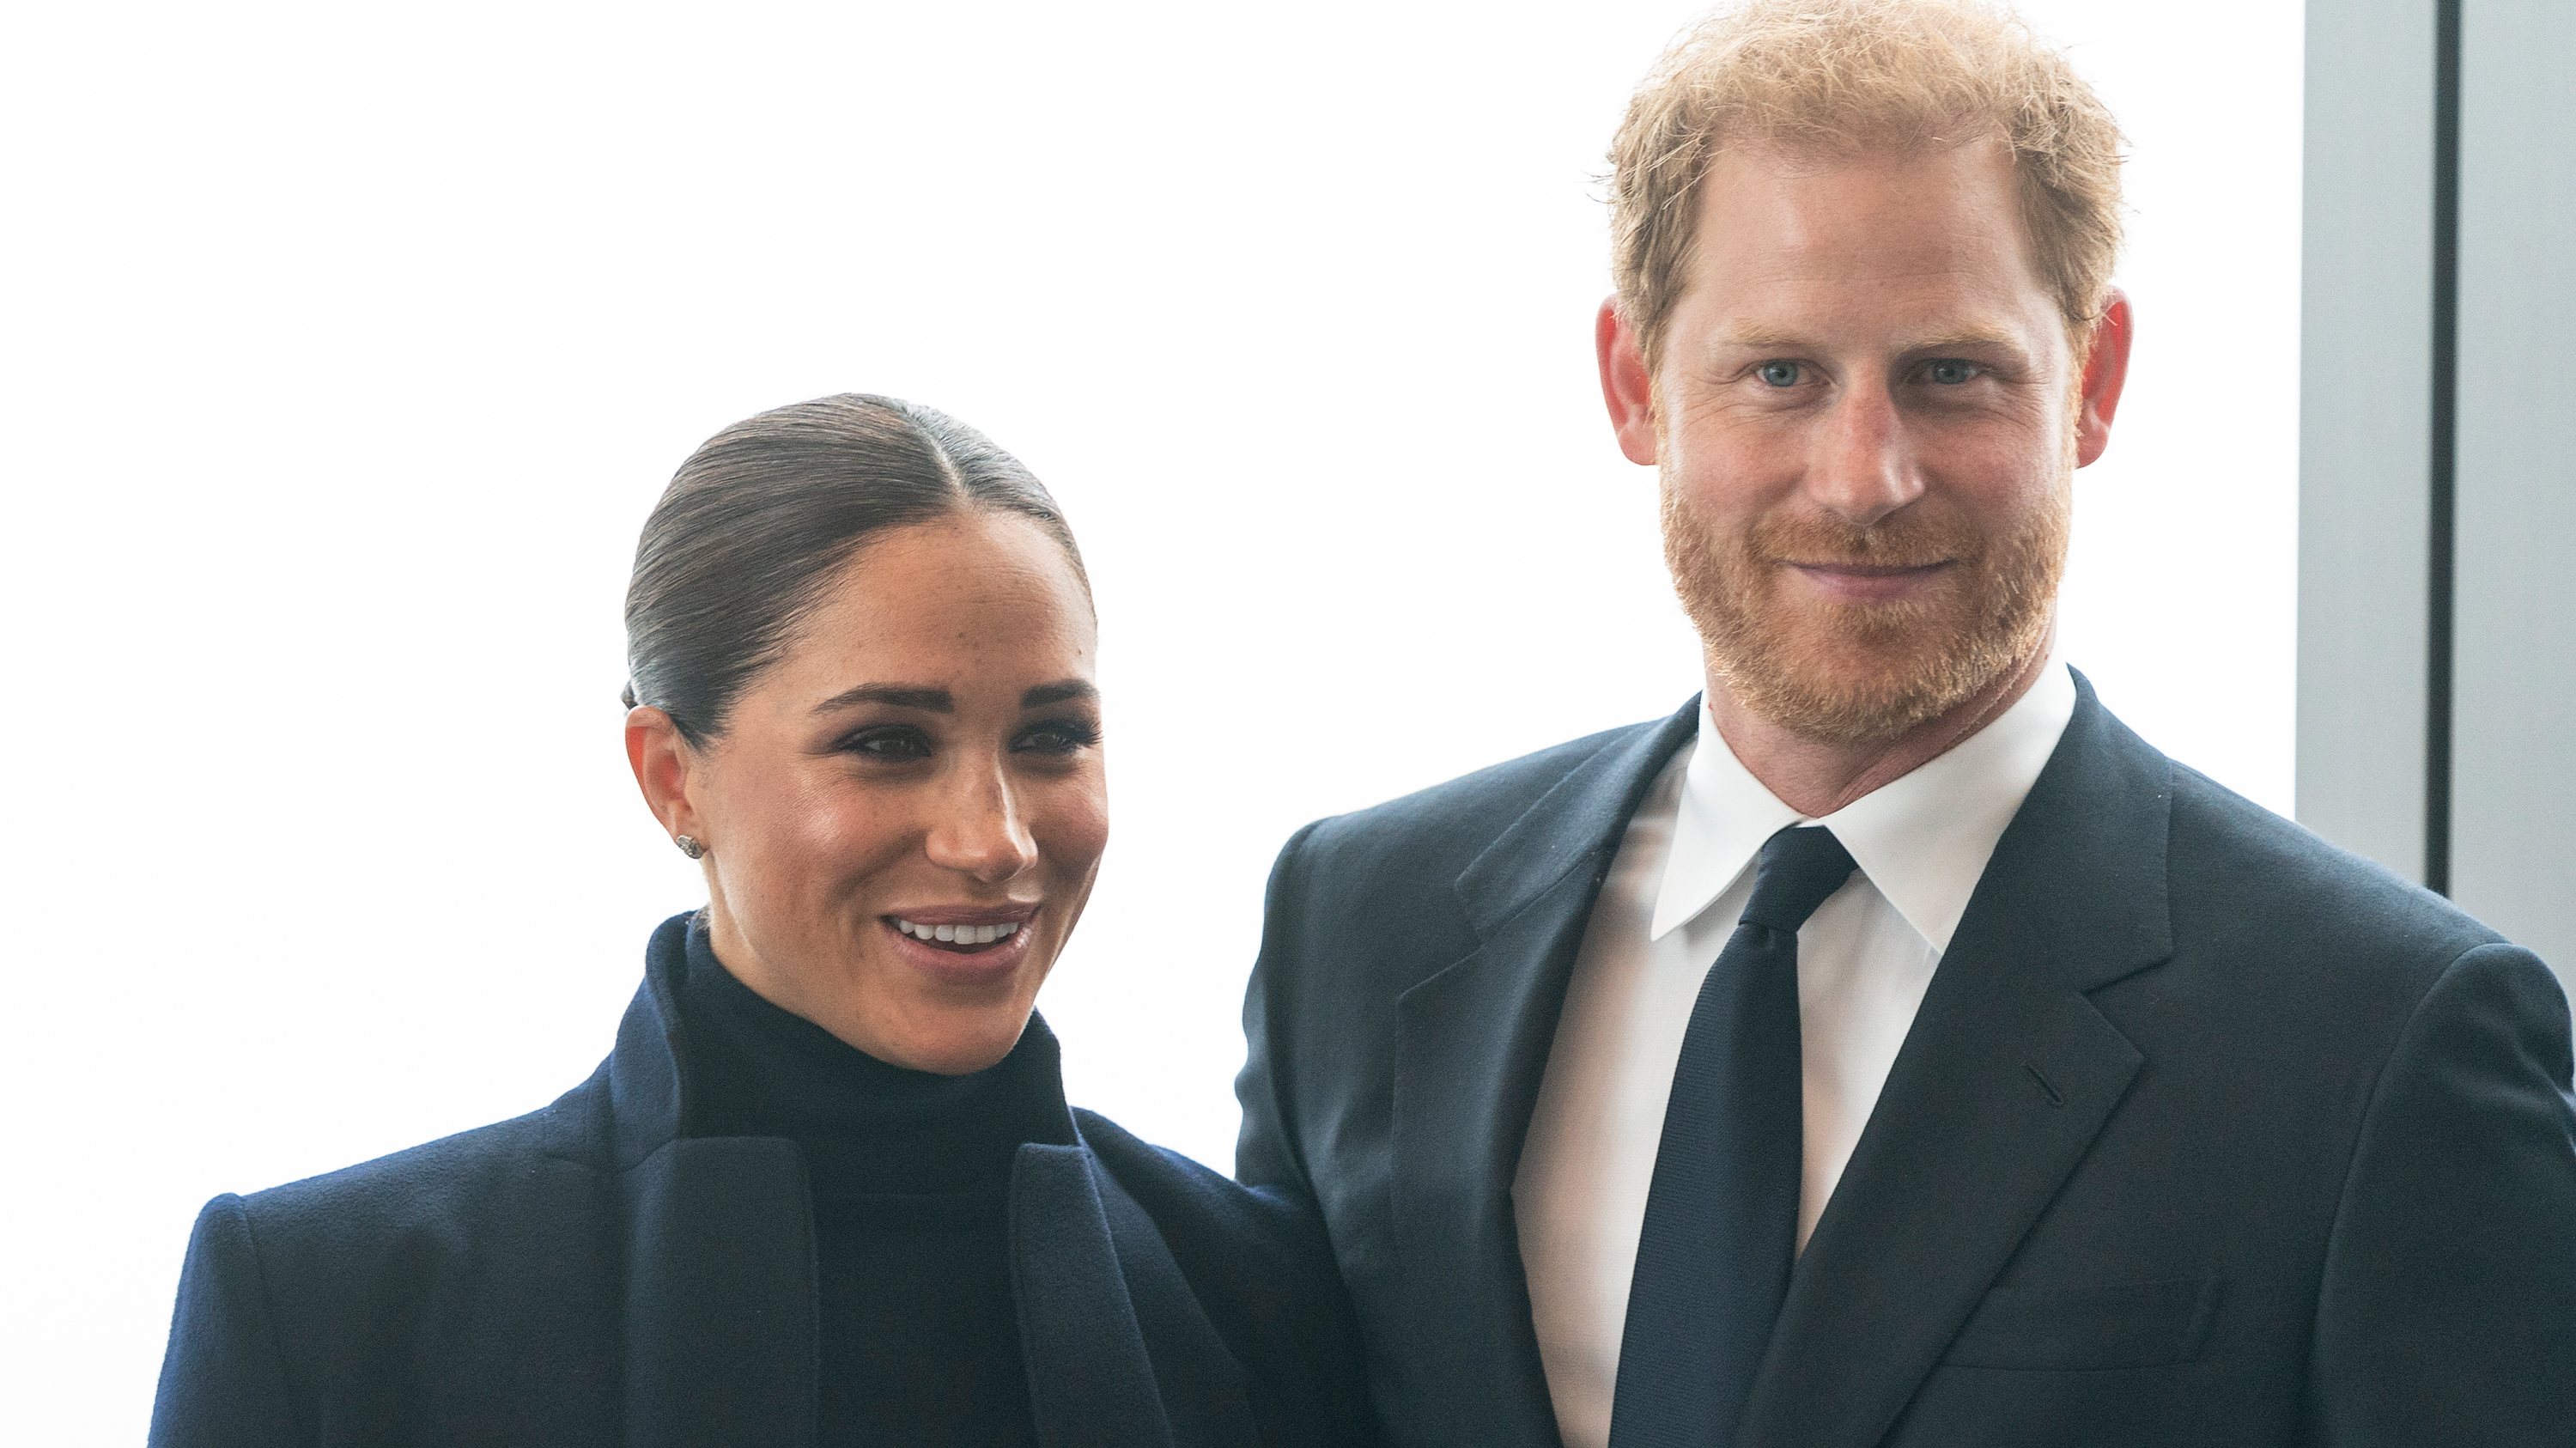 The Duke and Duchess of Sussex, Prince Harry and Meghan